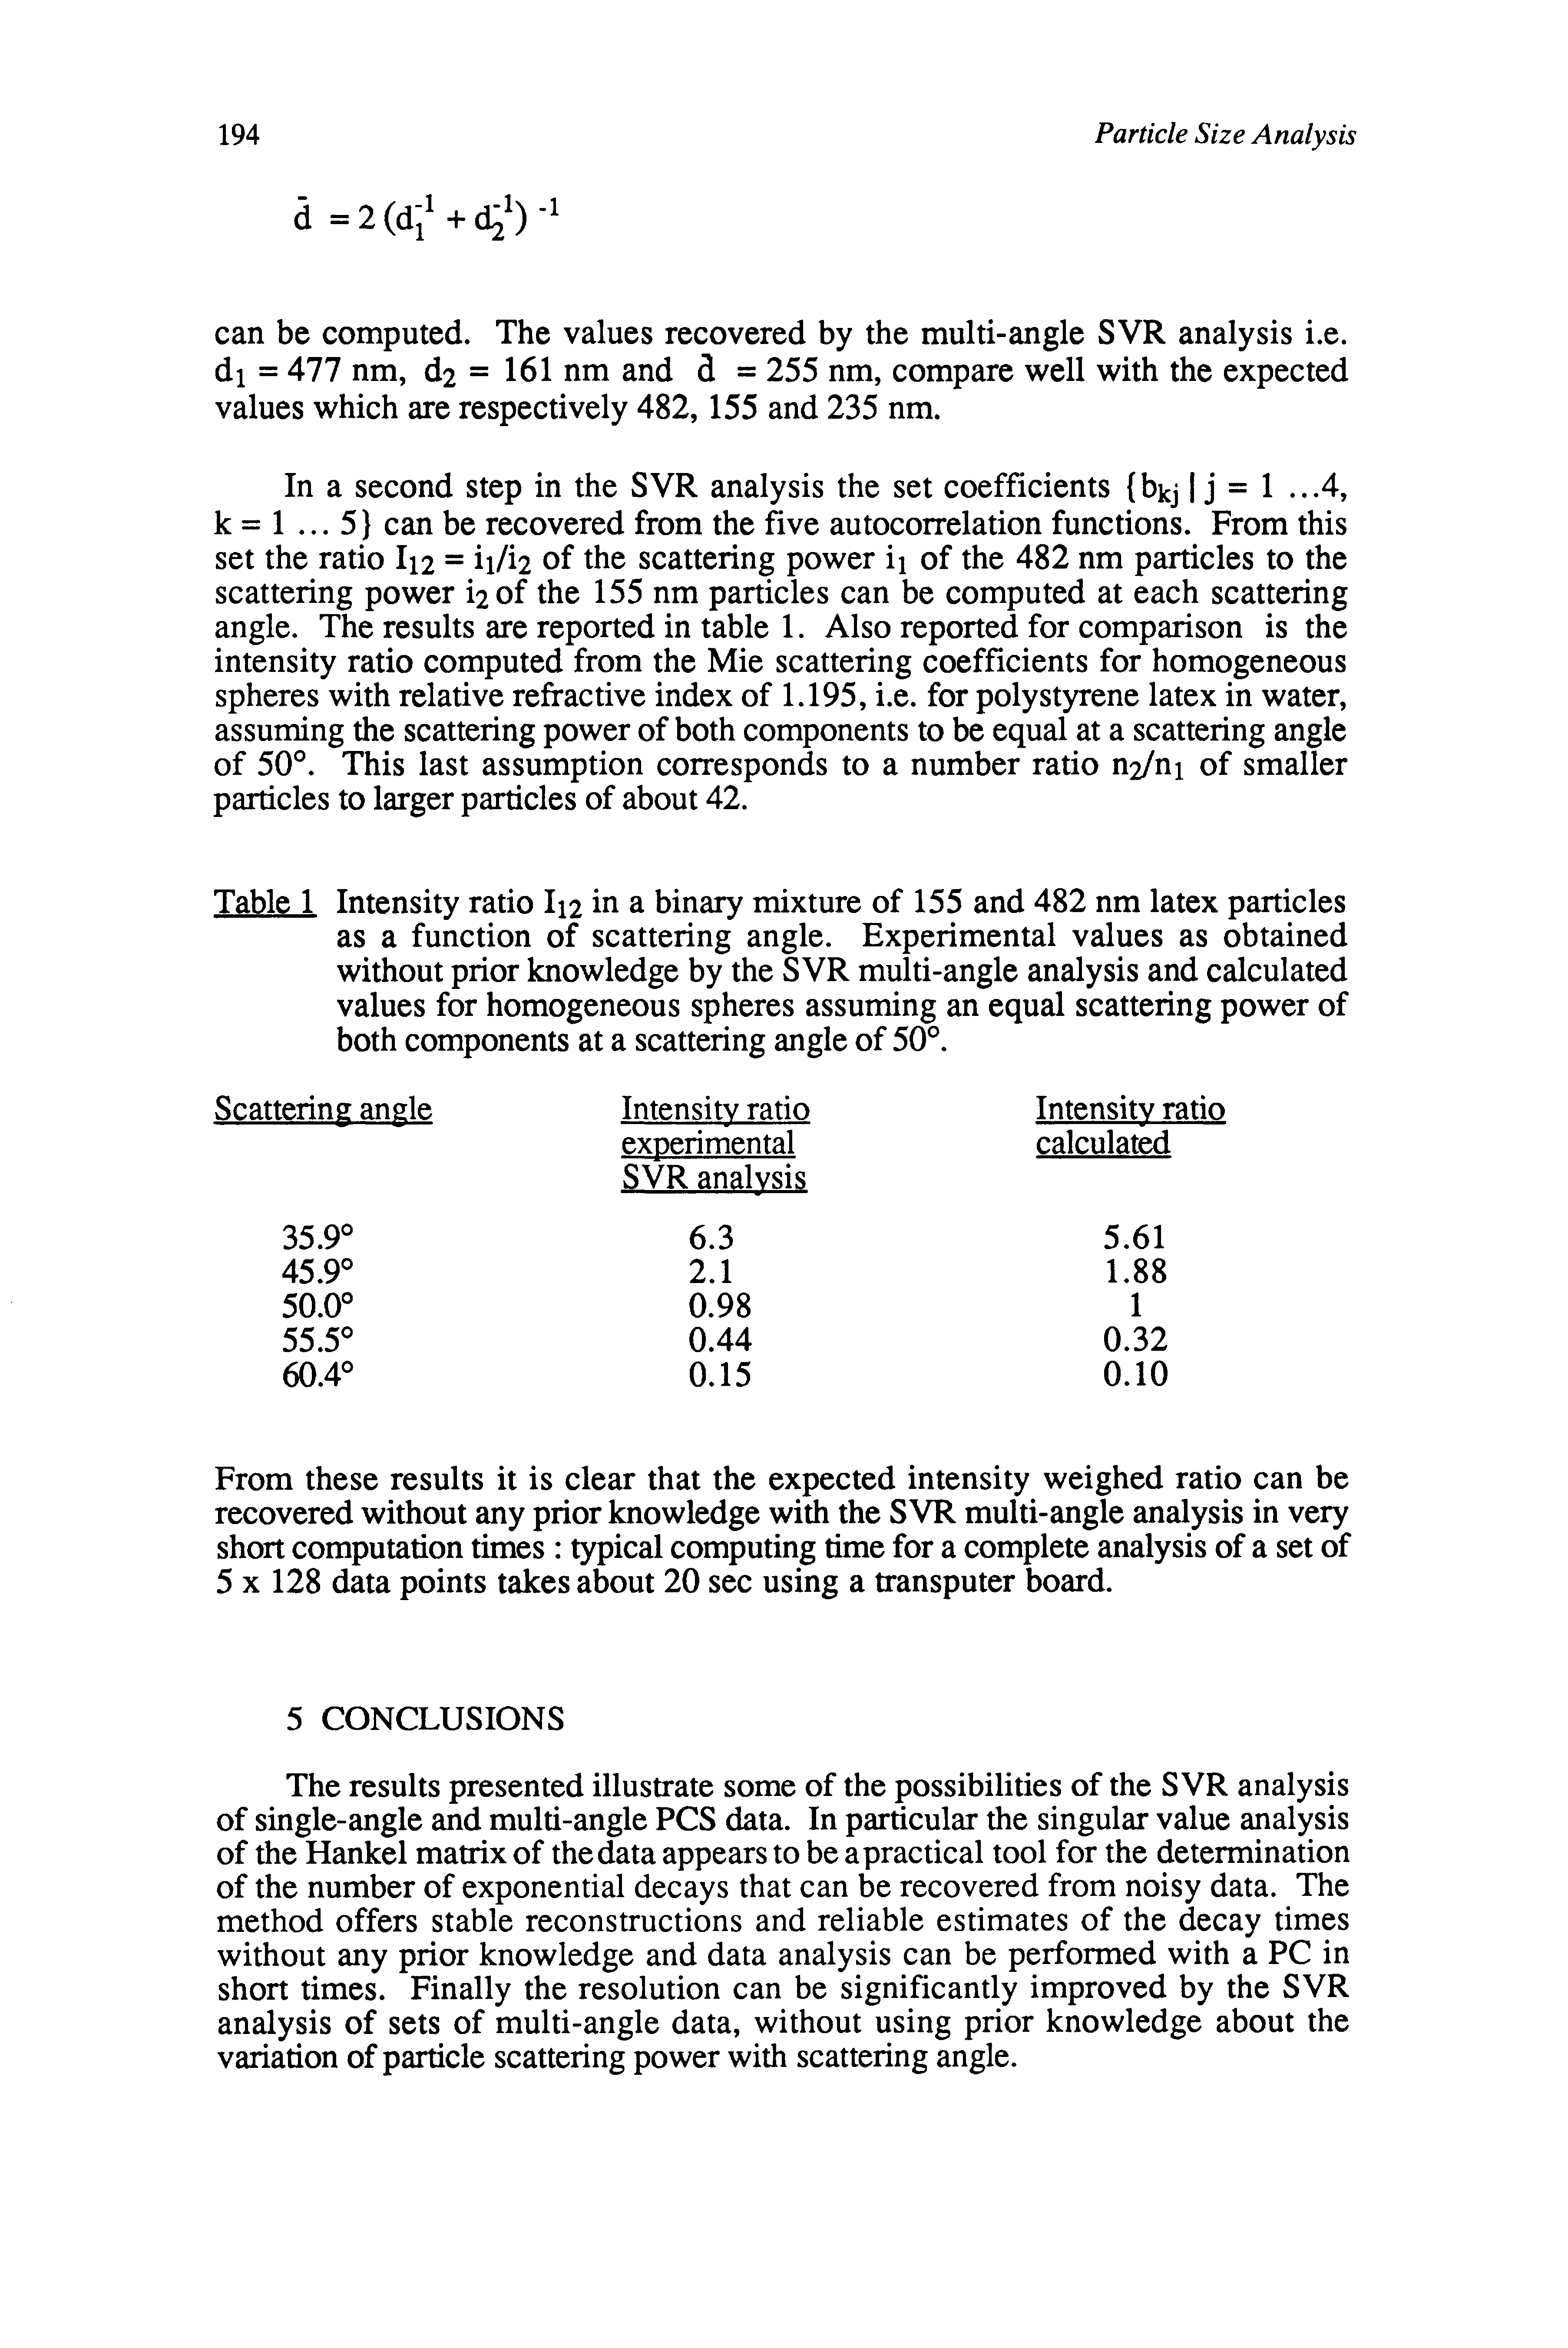 Table 1 Intensity ratio I12 in a binary mixture of 155 and 482 nm latex particles as a function of scattering angle. Experimental values as obtained without prior knowledge by the SVR multi-angle analysis and calculated values for homogeneous spheres assuming an equal scattering power of both components at a scattering angle of 50°.